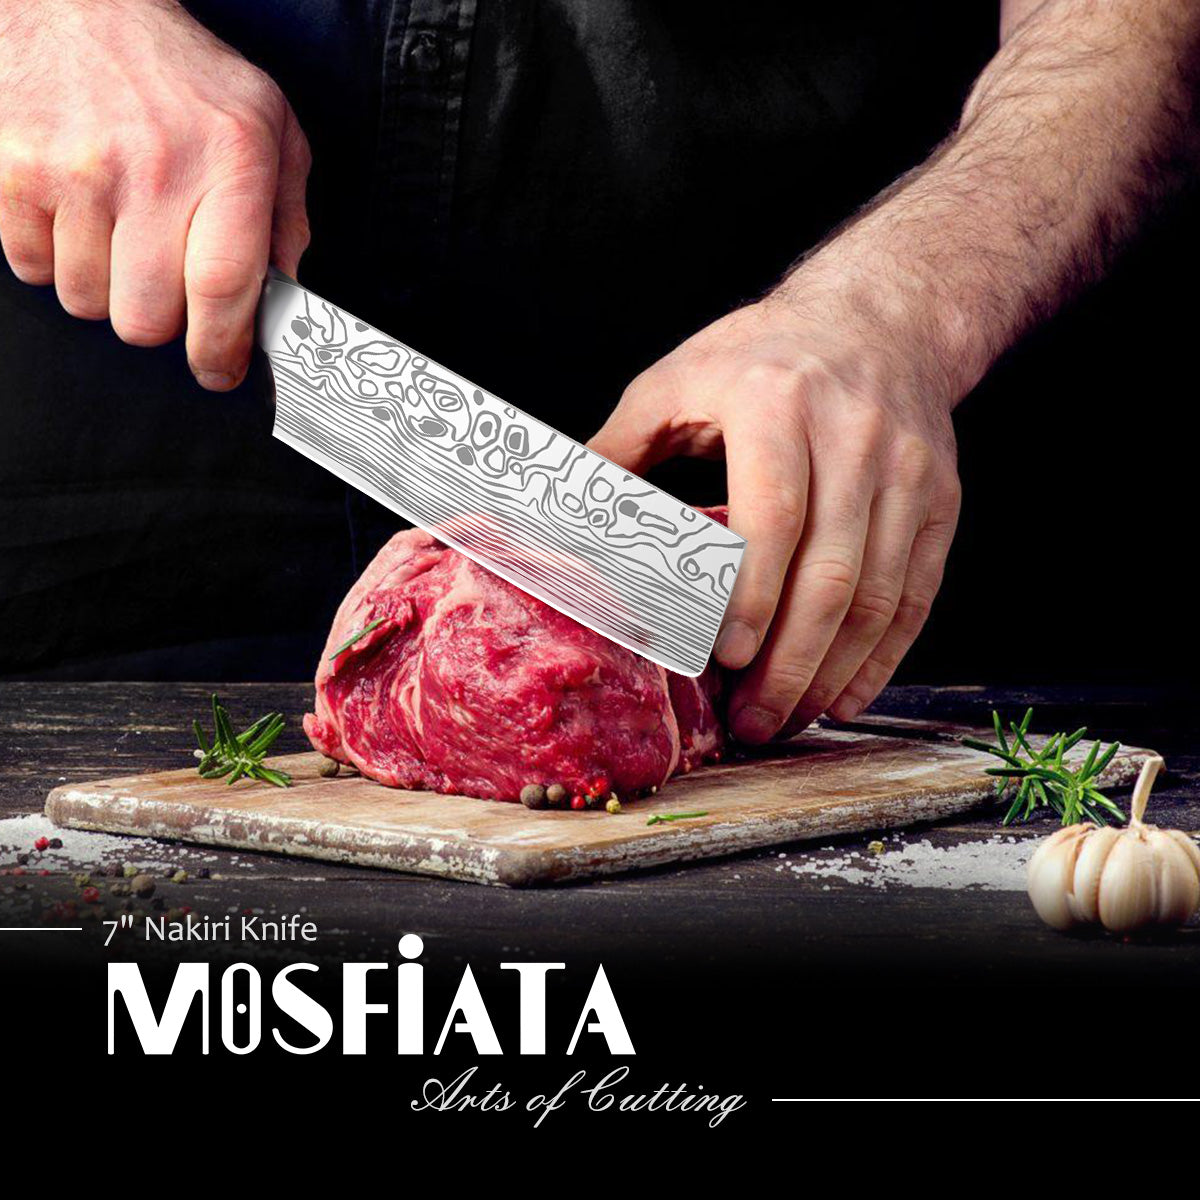 MOSFiATA 8 inch Super Sharp Professional Chef's Knife with Finger Guard and Knife Sharpener, German High Carbon Stainless Steel 4116 with Micarta